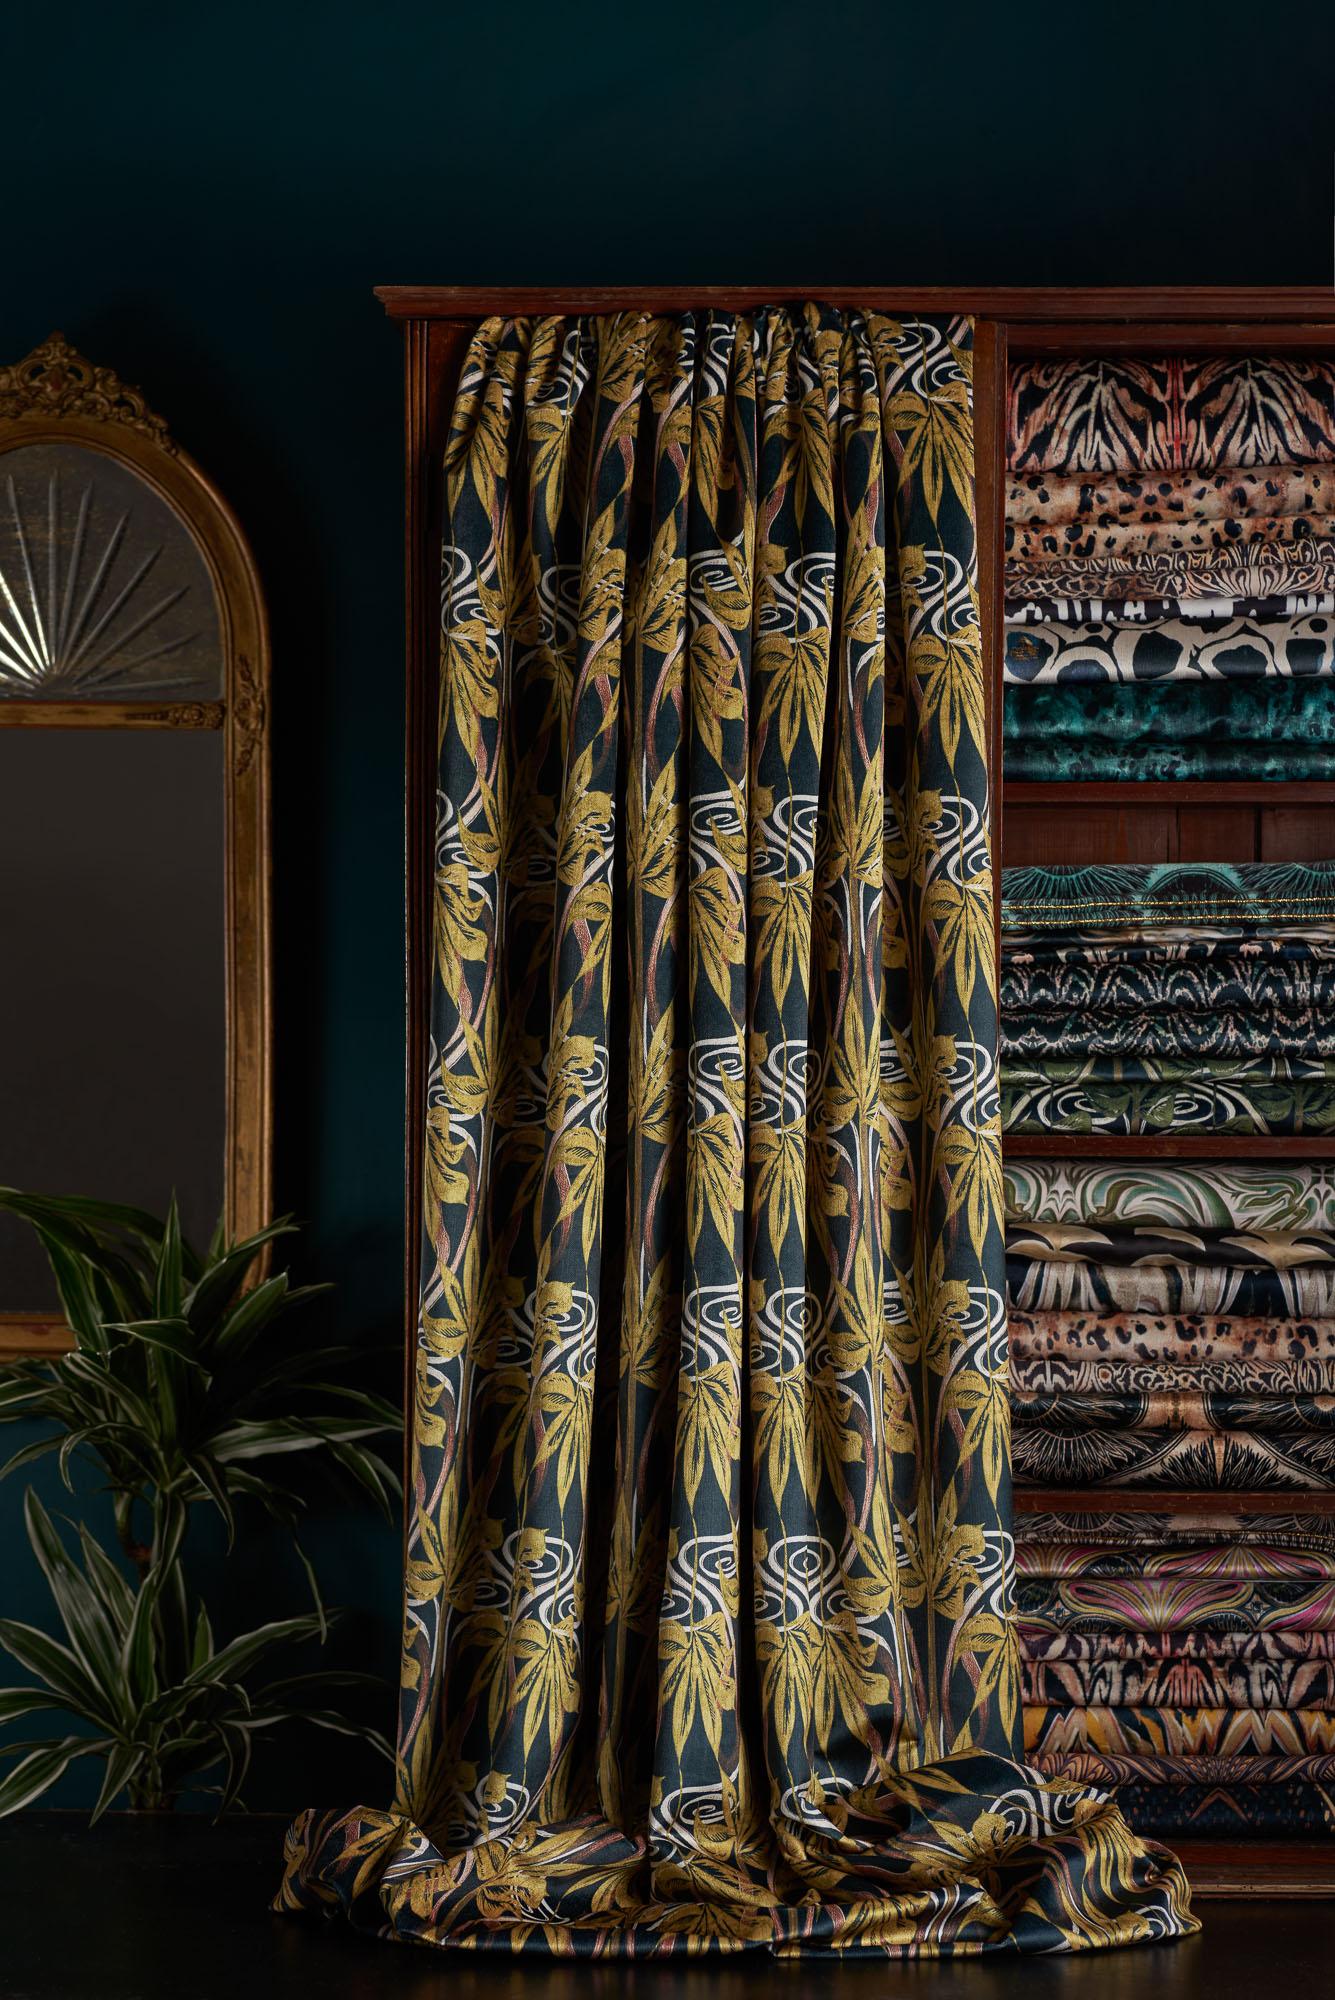 Dianne is a sandwiched print of two of Anna’s linocuts, pieced together to form a lyrical, jungle-like design which lends well to maximalist schemes. With a hint of Art Nouveau influence, this vibrant gold and reds colourway sits well with